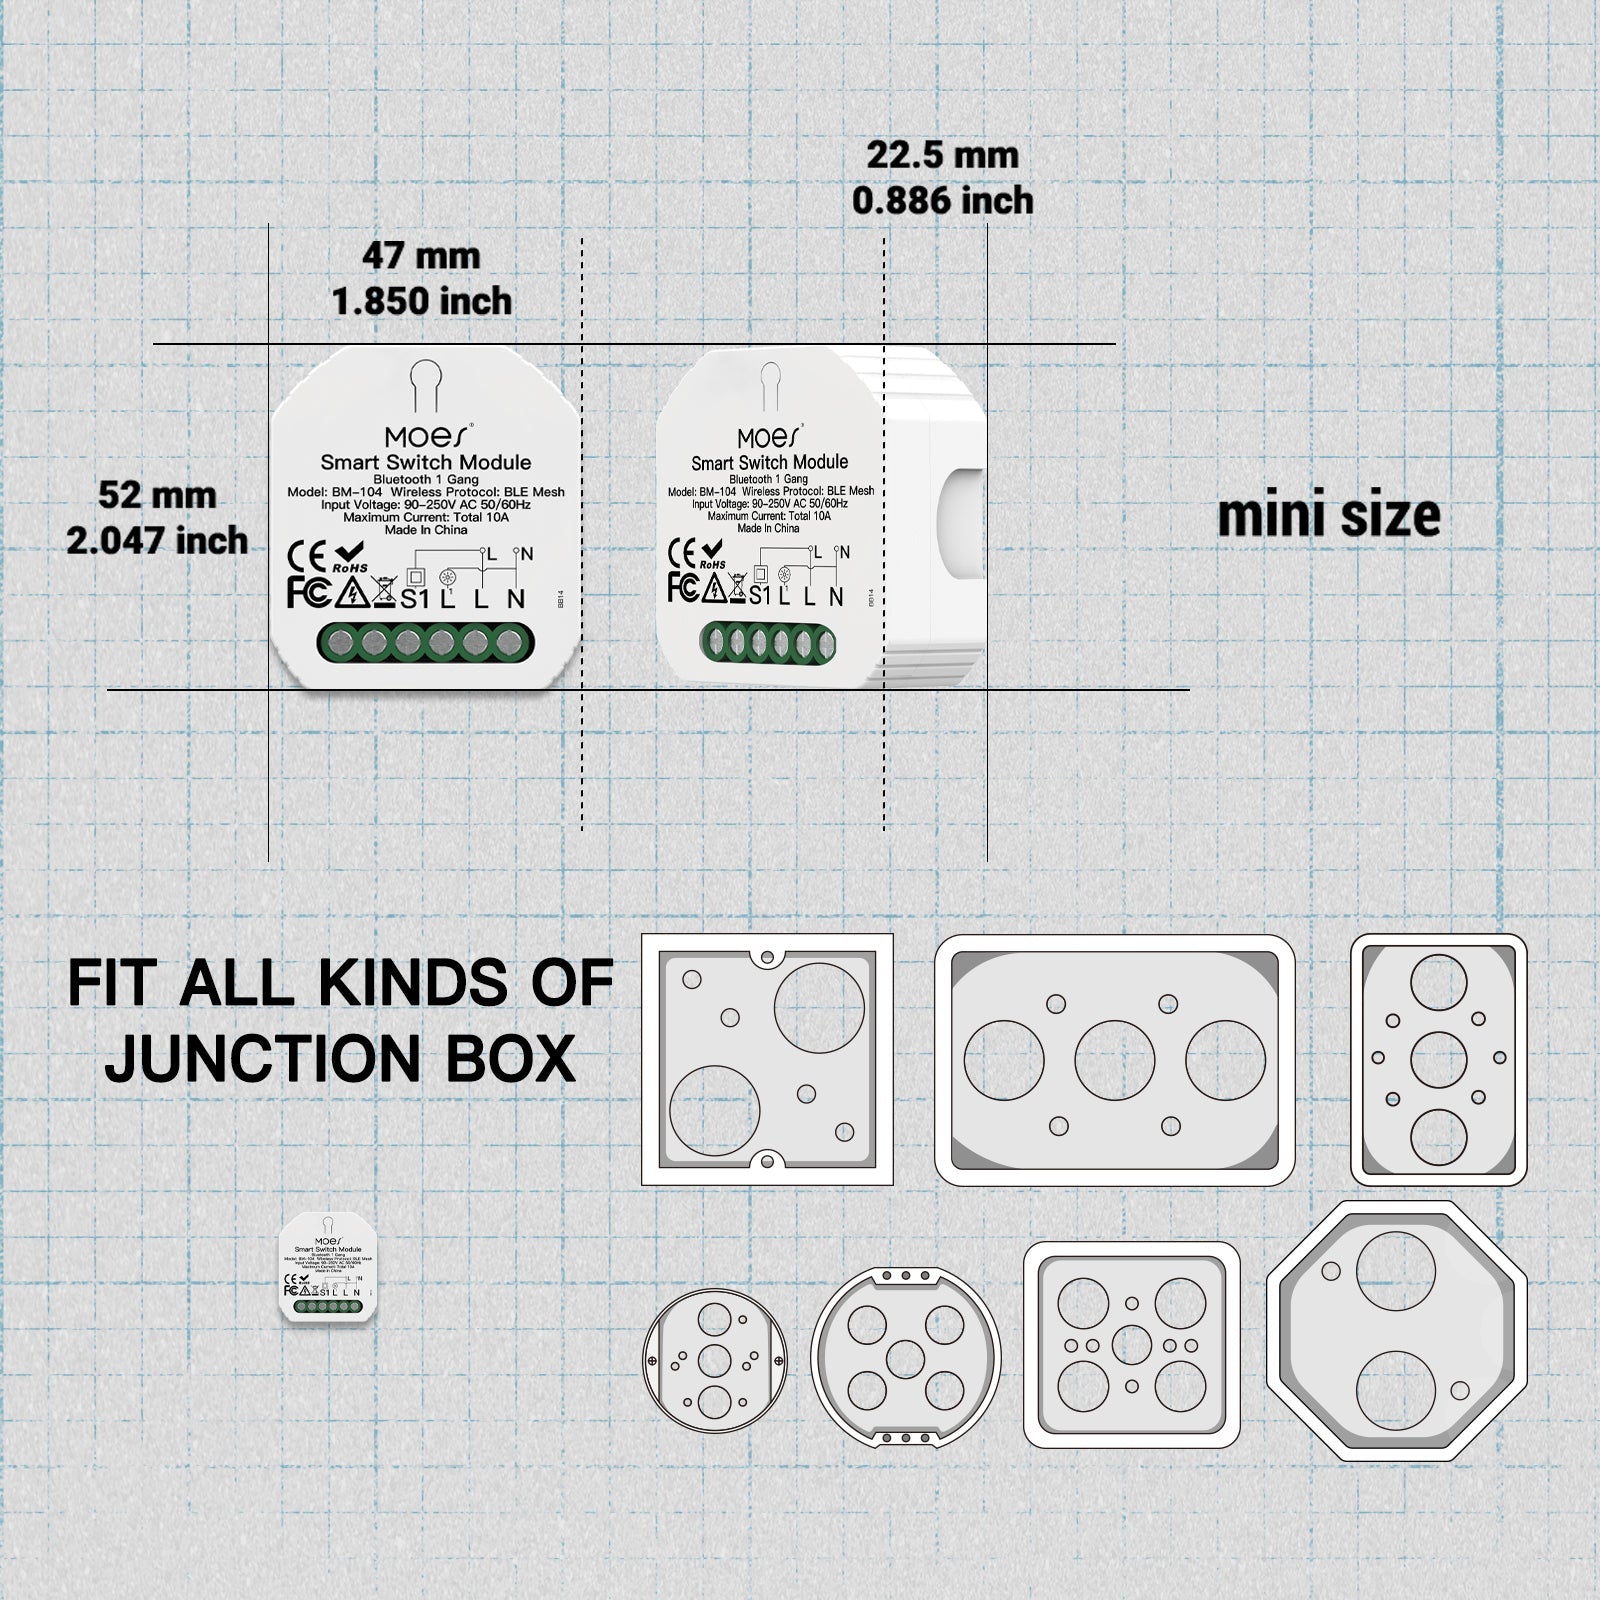 fit all kinds of junction box - MOES